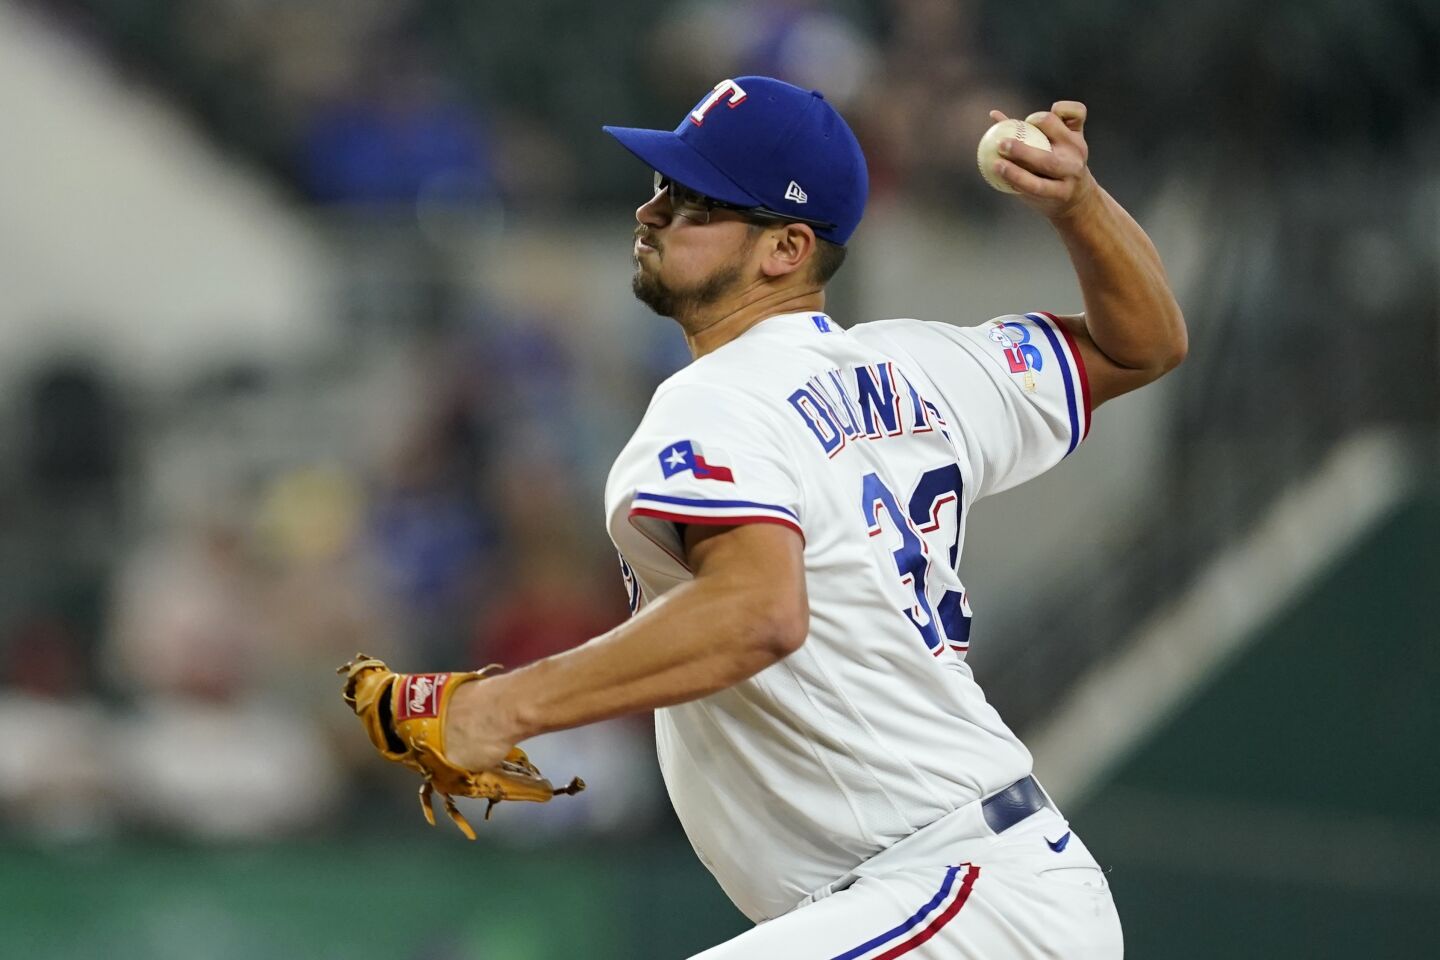 22 | Texas Rangers (65-87; LW: 22)Dane Dunning’s season has come to an end as he’ll undergo arthroscopic surgery on his hip. He set career-highs with 153 1/3innings and 135 strikeouts in his third big-league season.